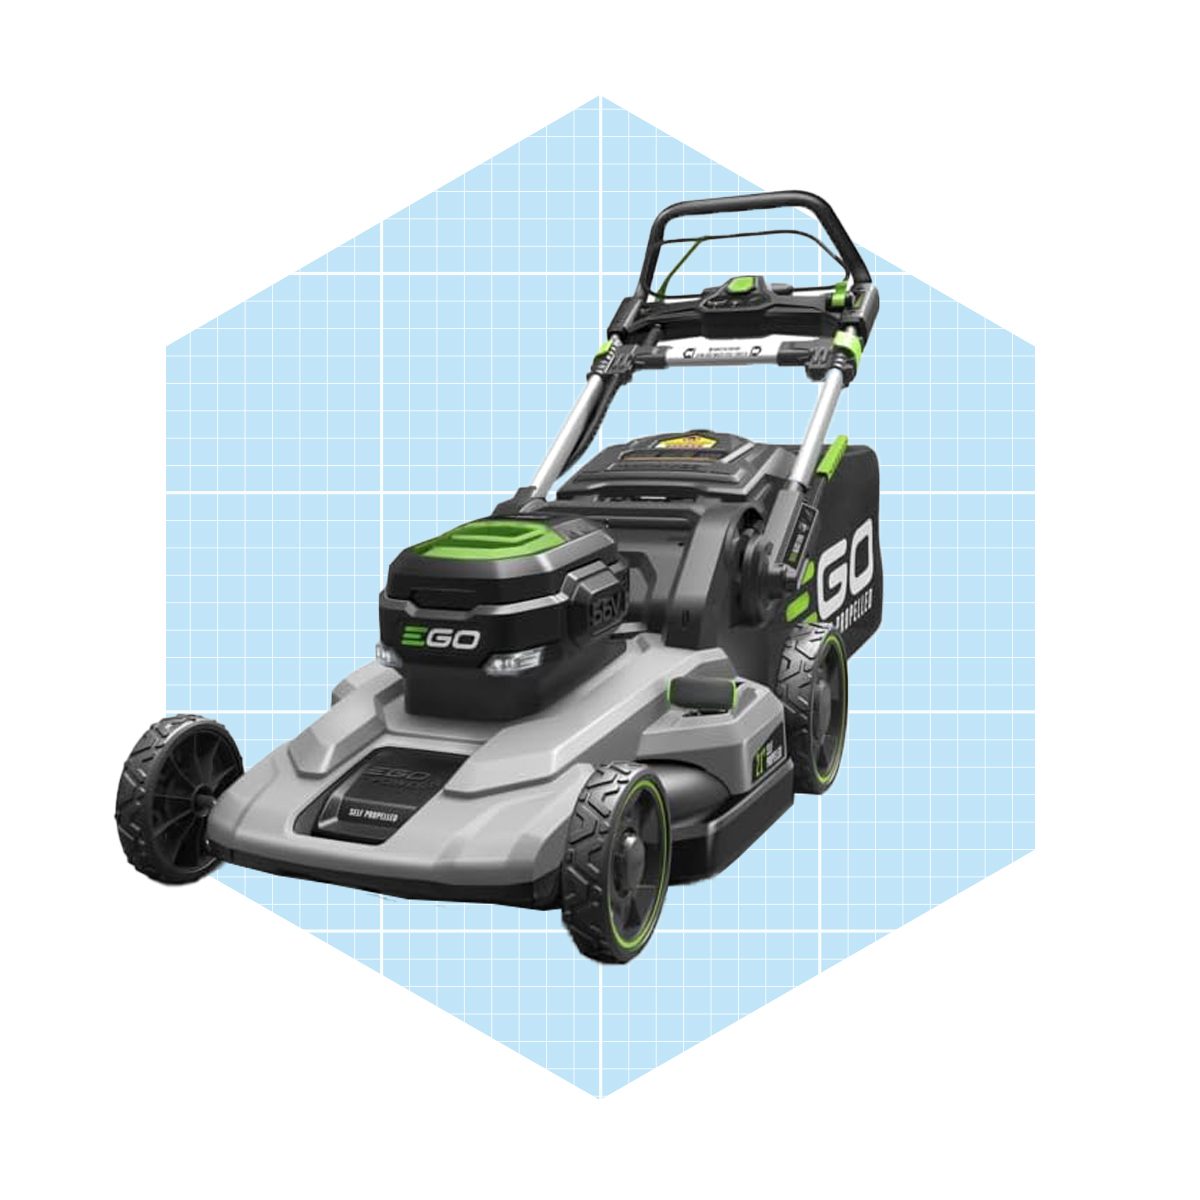 Ego Power+ Lm2102sp A 21 Inch 56 Volt Lithium Ion Self Propelled Cordless Lawn Mower